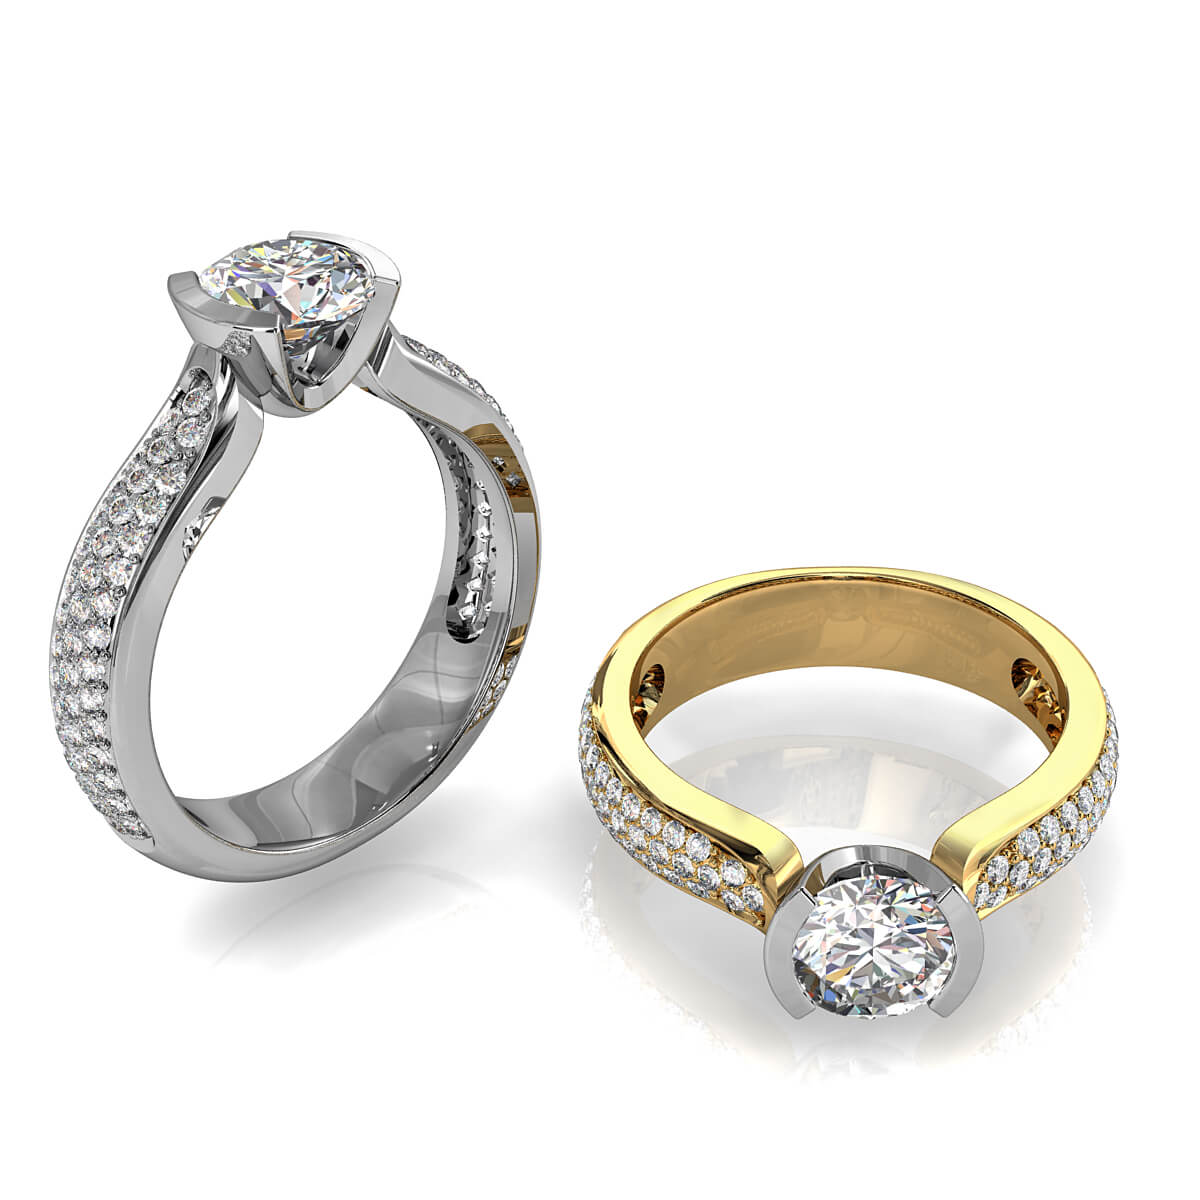 Round Brilliant Cut Diamond Solitaire Engagement Ring, Semi Bezel Tension Set on a Tapered Pave Band.